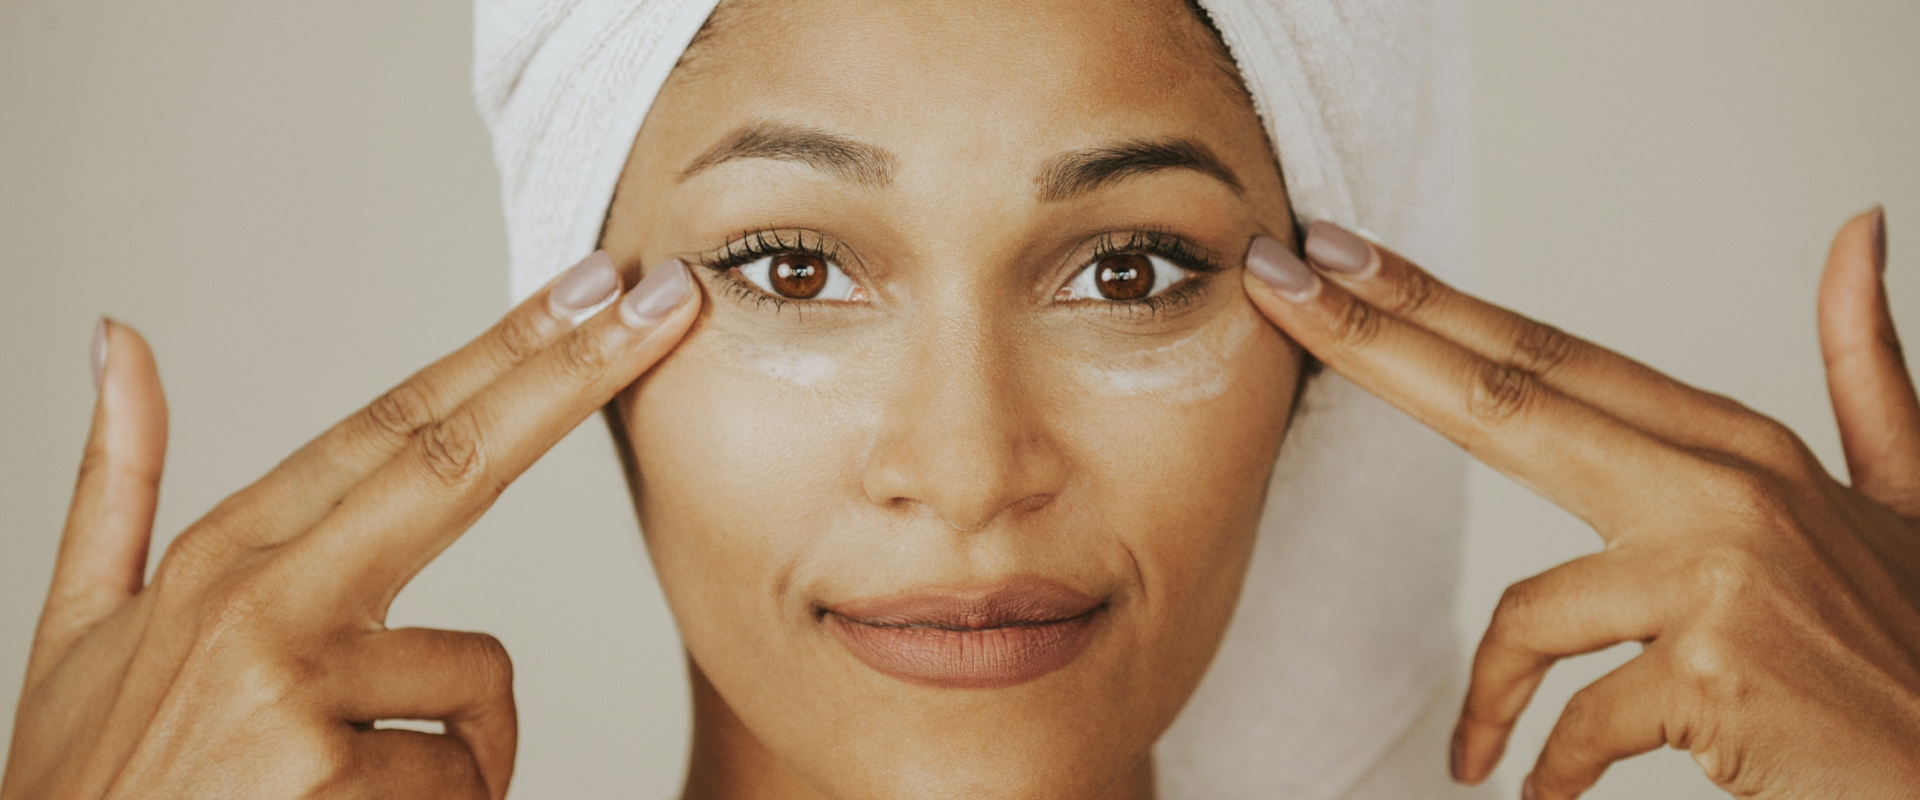 skincare for wrinkles ageing woman